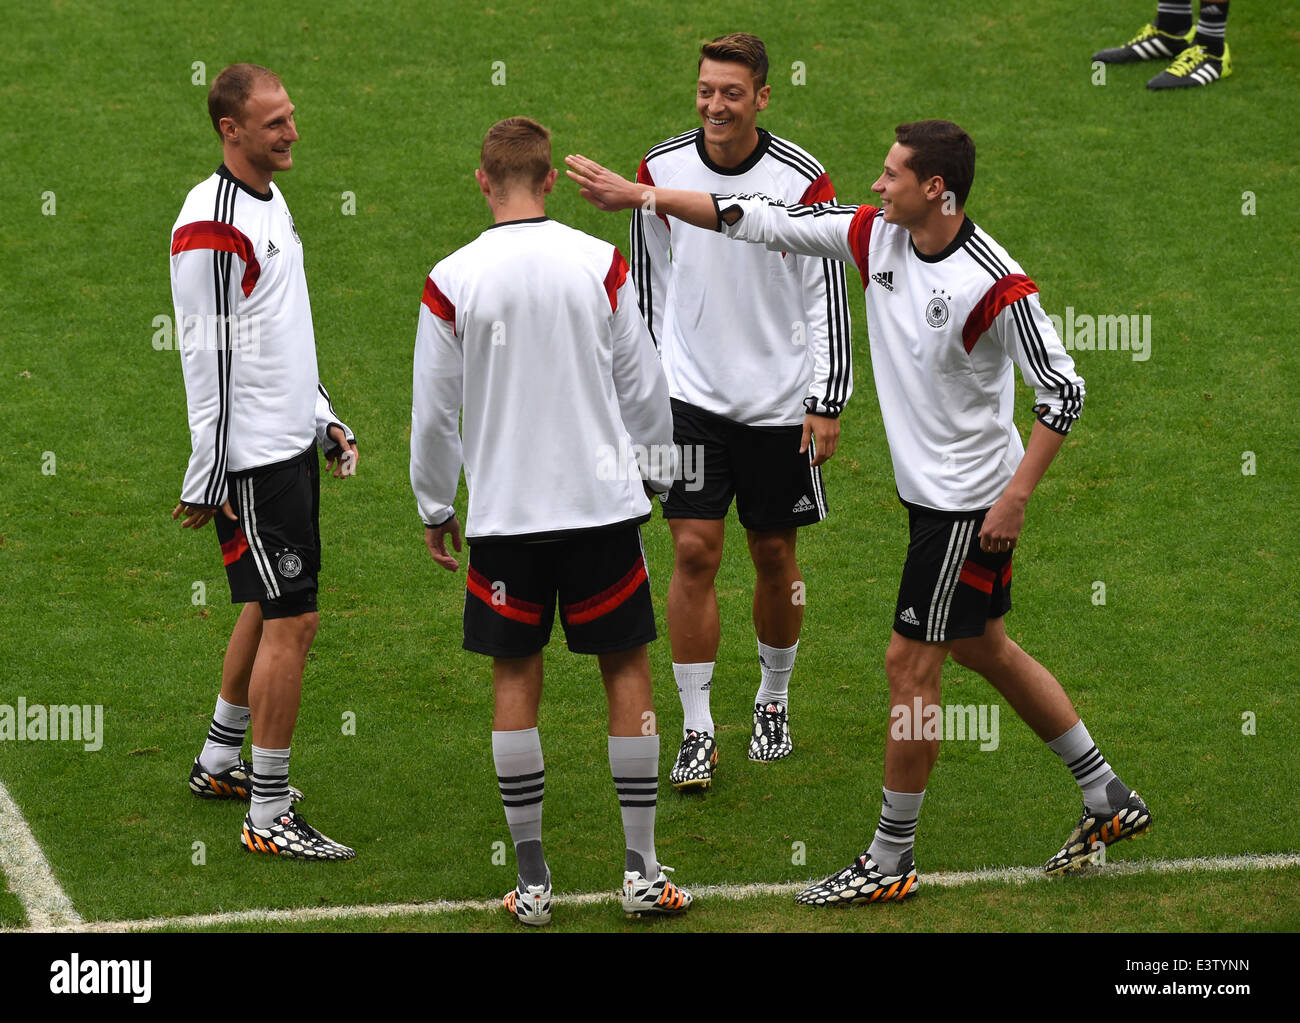 Porto Alegre, Brazil. 29th June, 2014. Germany's (L-R) Benedikt Hoewedes, Christoph Kramer, Mesut Oezil and Julian Draxler fool around during a training session at the Estadio Beira-Rio in Porto Alegre, Brazil, 29 June 2014. Germany faces Algeria in a FIFA soccer World Cup round of sixteen match on 30 June 2014. Photo: Marcus Brandt/dpa/Alamy Live News Stock Photo